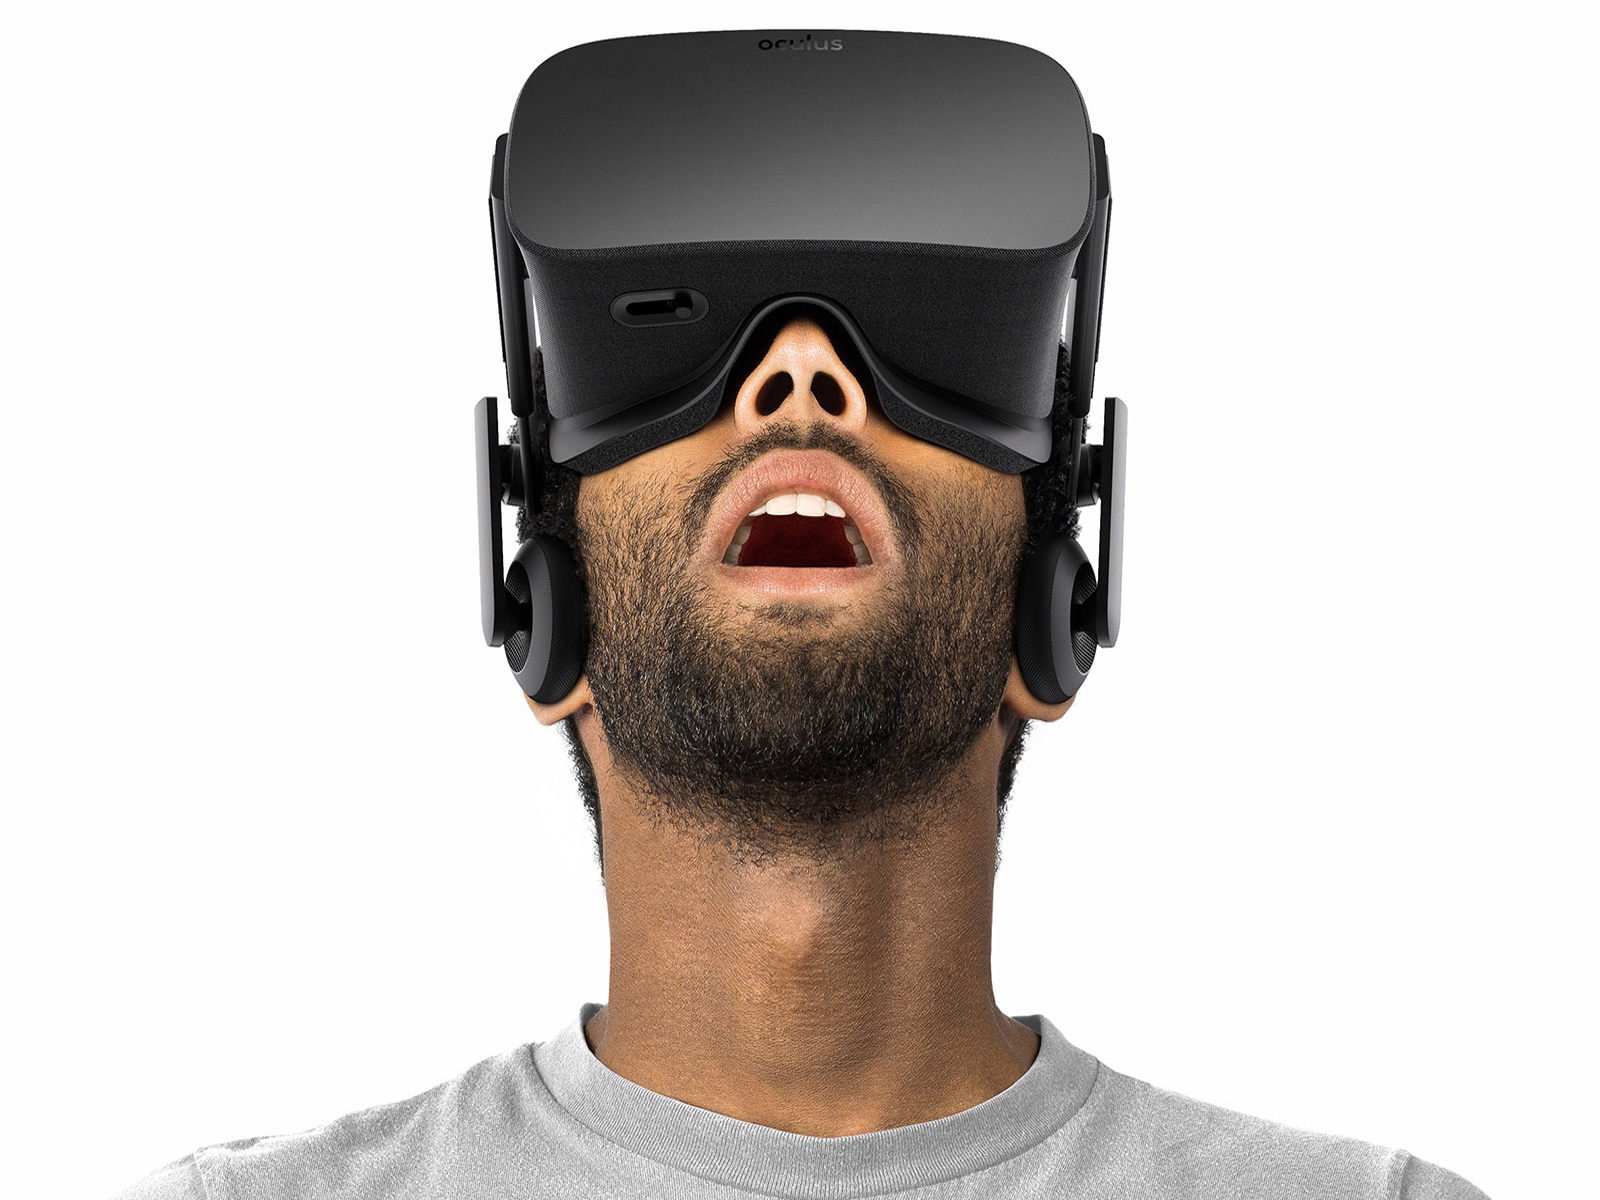 Interpretive omgivet Arena Can I use my Oculus Rift without a PC? | Windows Central